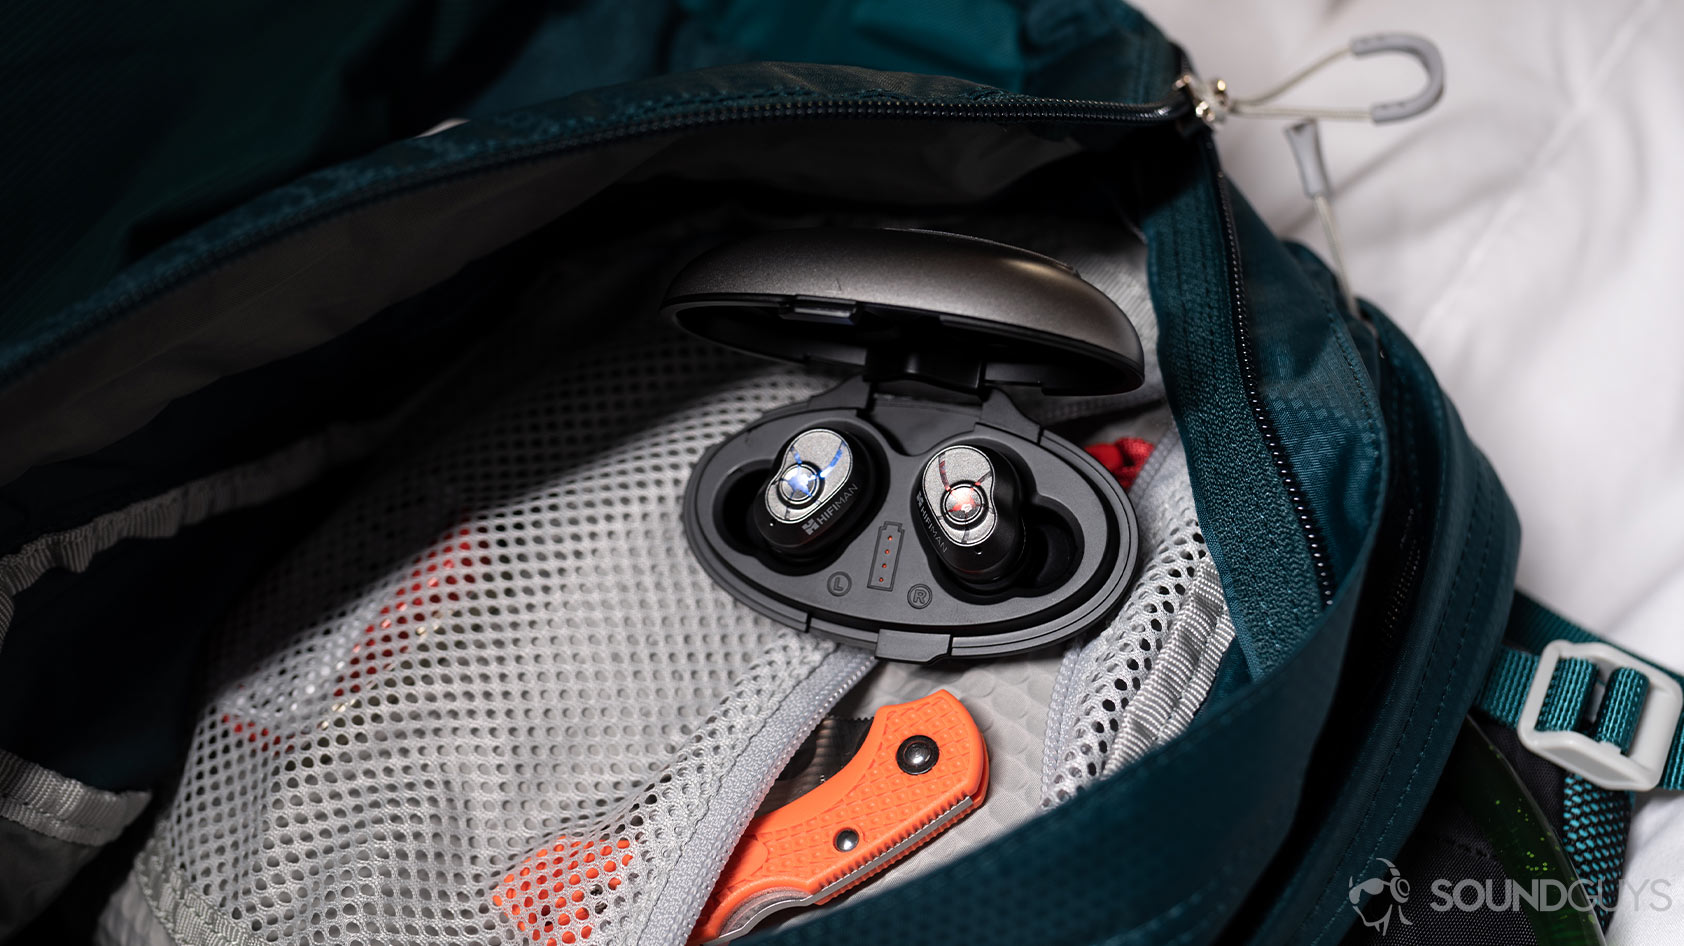 A photo of the HiFiMan TWS600 true wireless earbuds in the case with each LED indicator lit up, and the case is open in a backpack compartment.